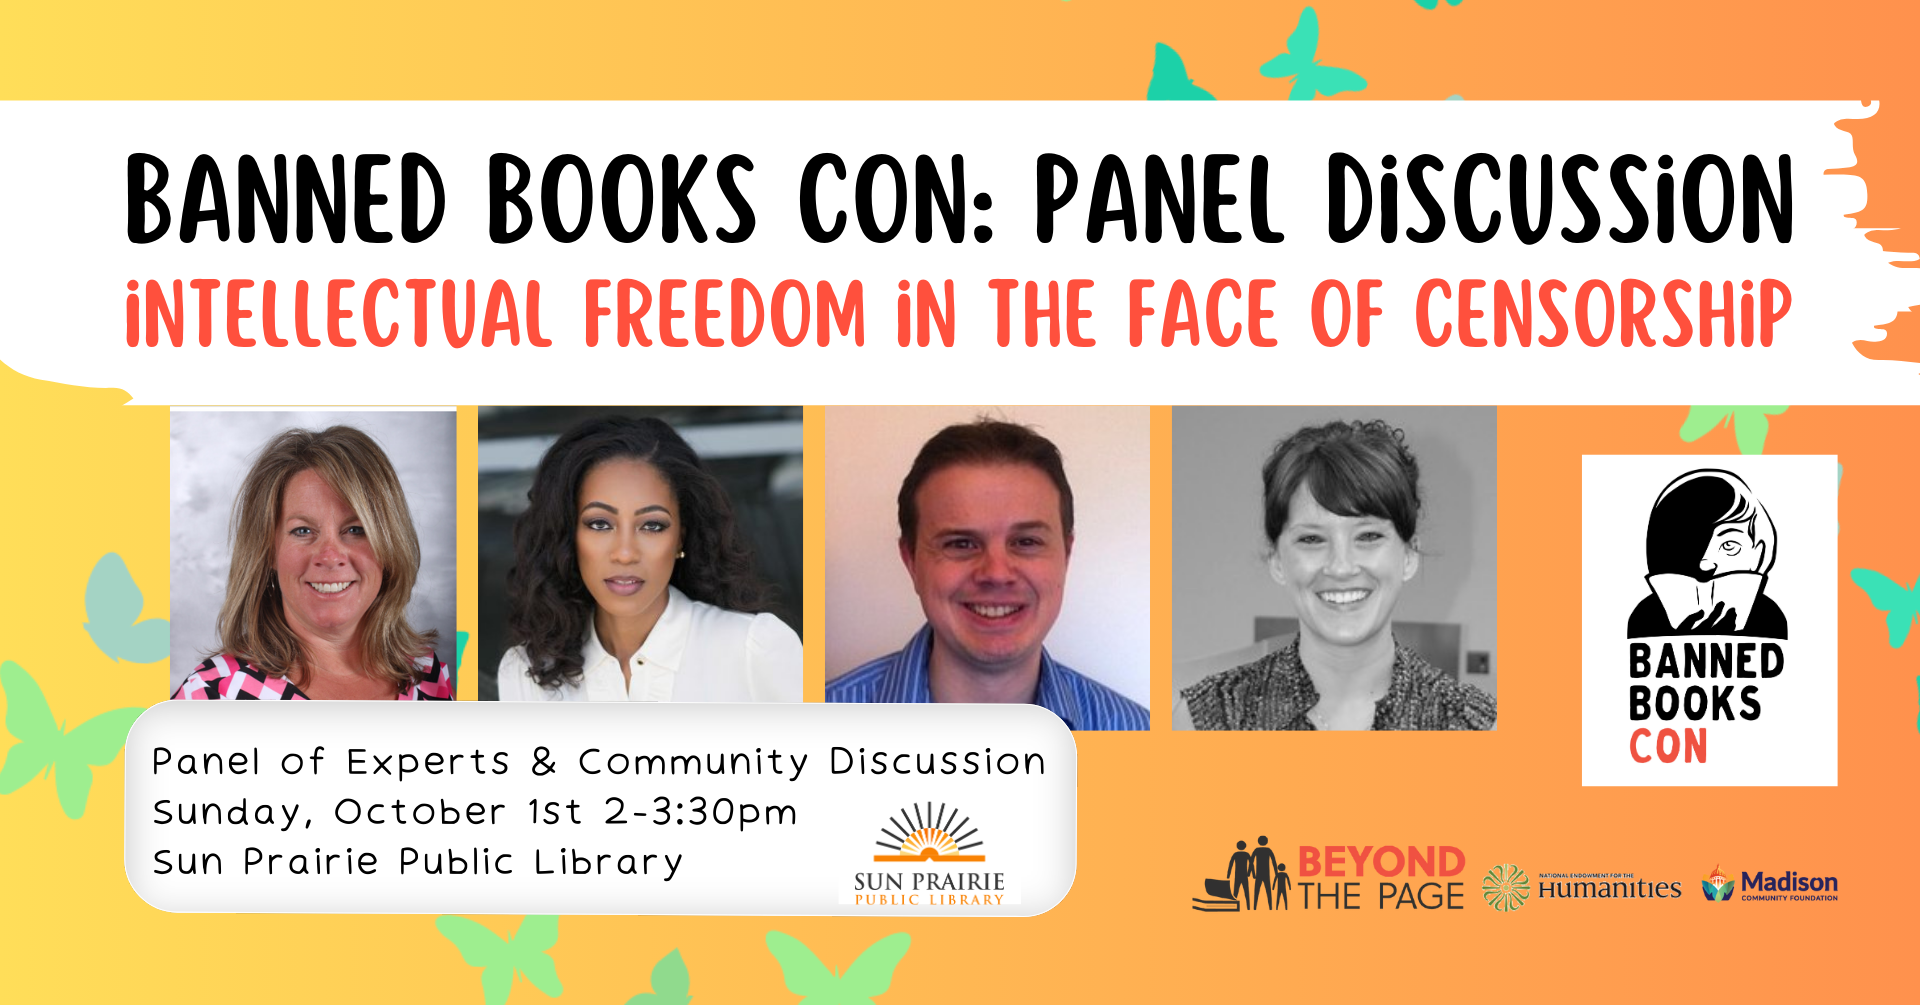 Banned Books Con: Panel Discussion Intellectual Freedom in the Face of Censorship Panel of experts & community discussion Sunday, October 1st 2-3:30pm Sun Prairie Public Library. Photos of 4 experts. Logos.